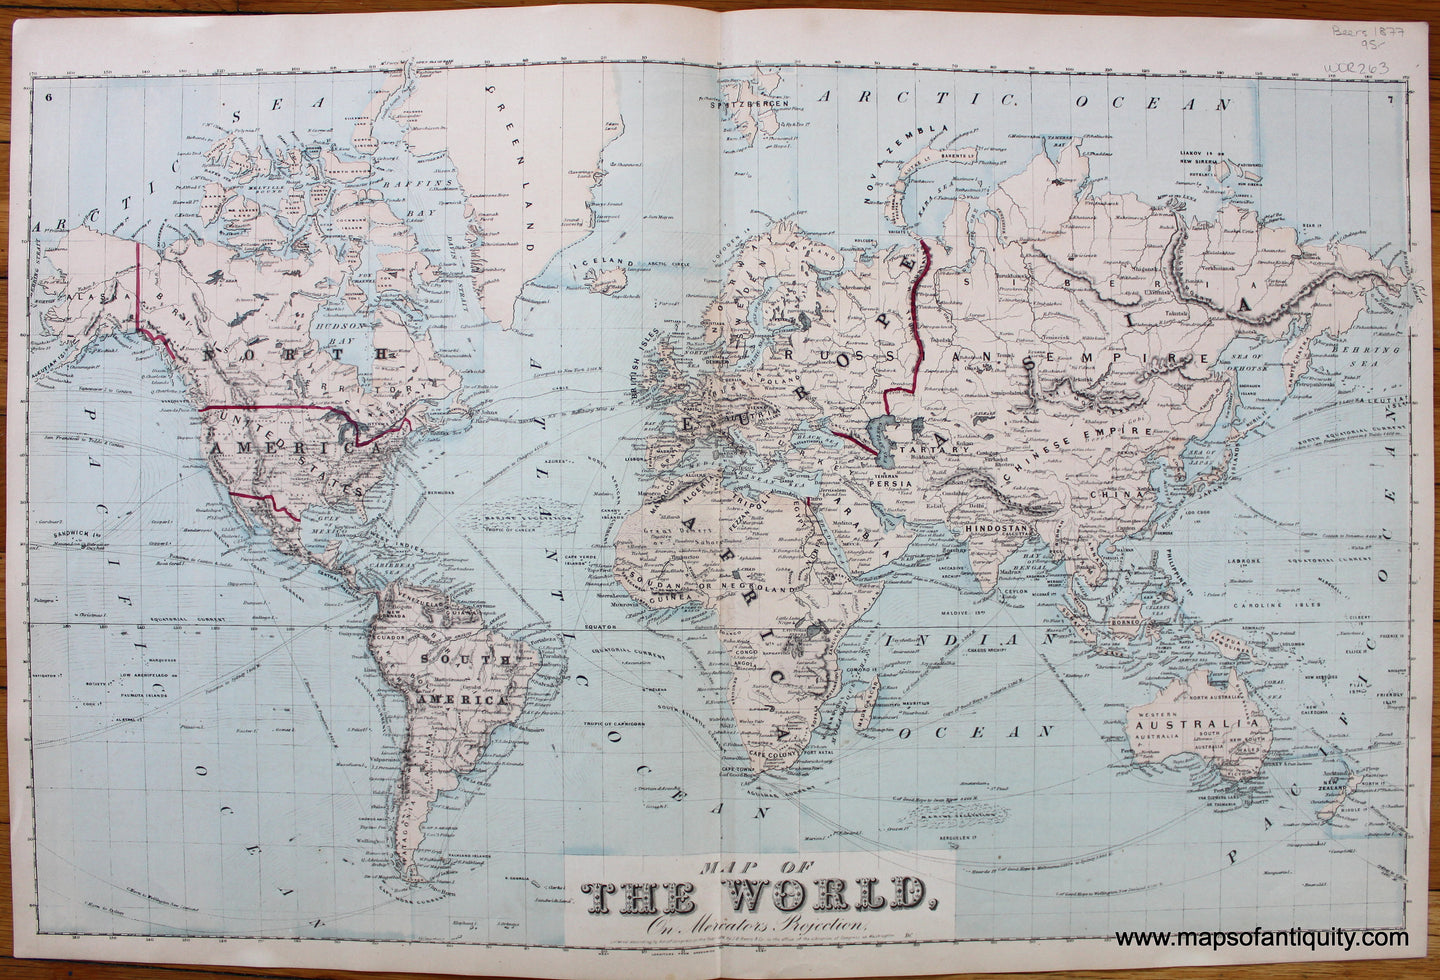 Map-of-the-World-on-Mercator's-Projection-1877-Beers-Antique-Map-Vermont-Orange-County-1870s-1800s-19th-century-Maps-of-Antiquity